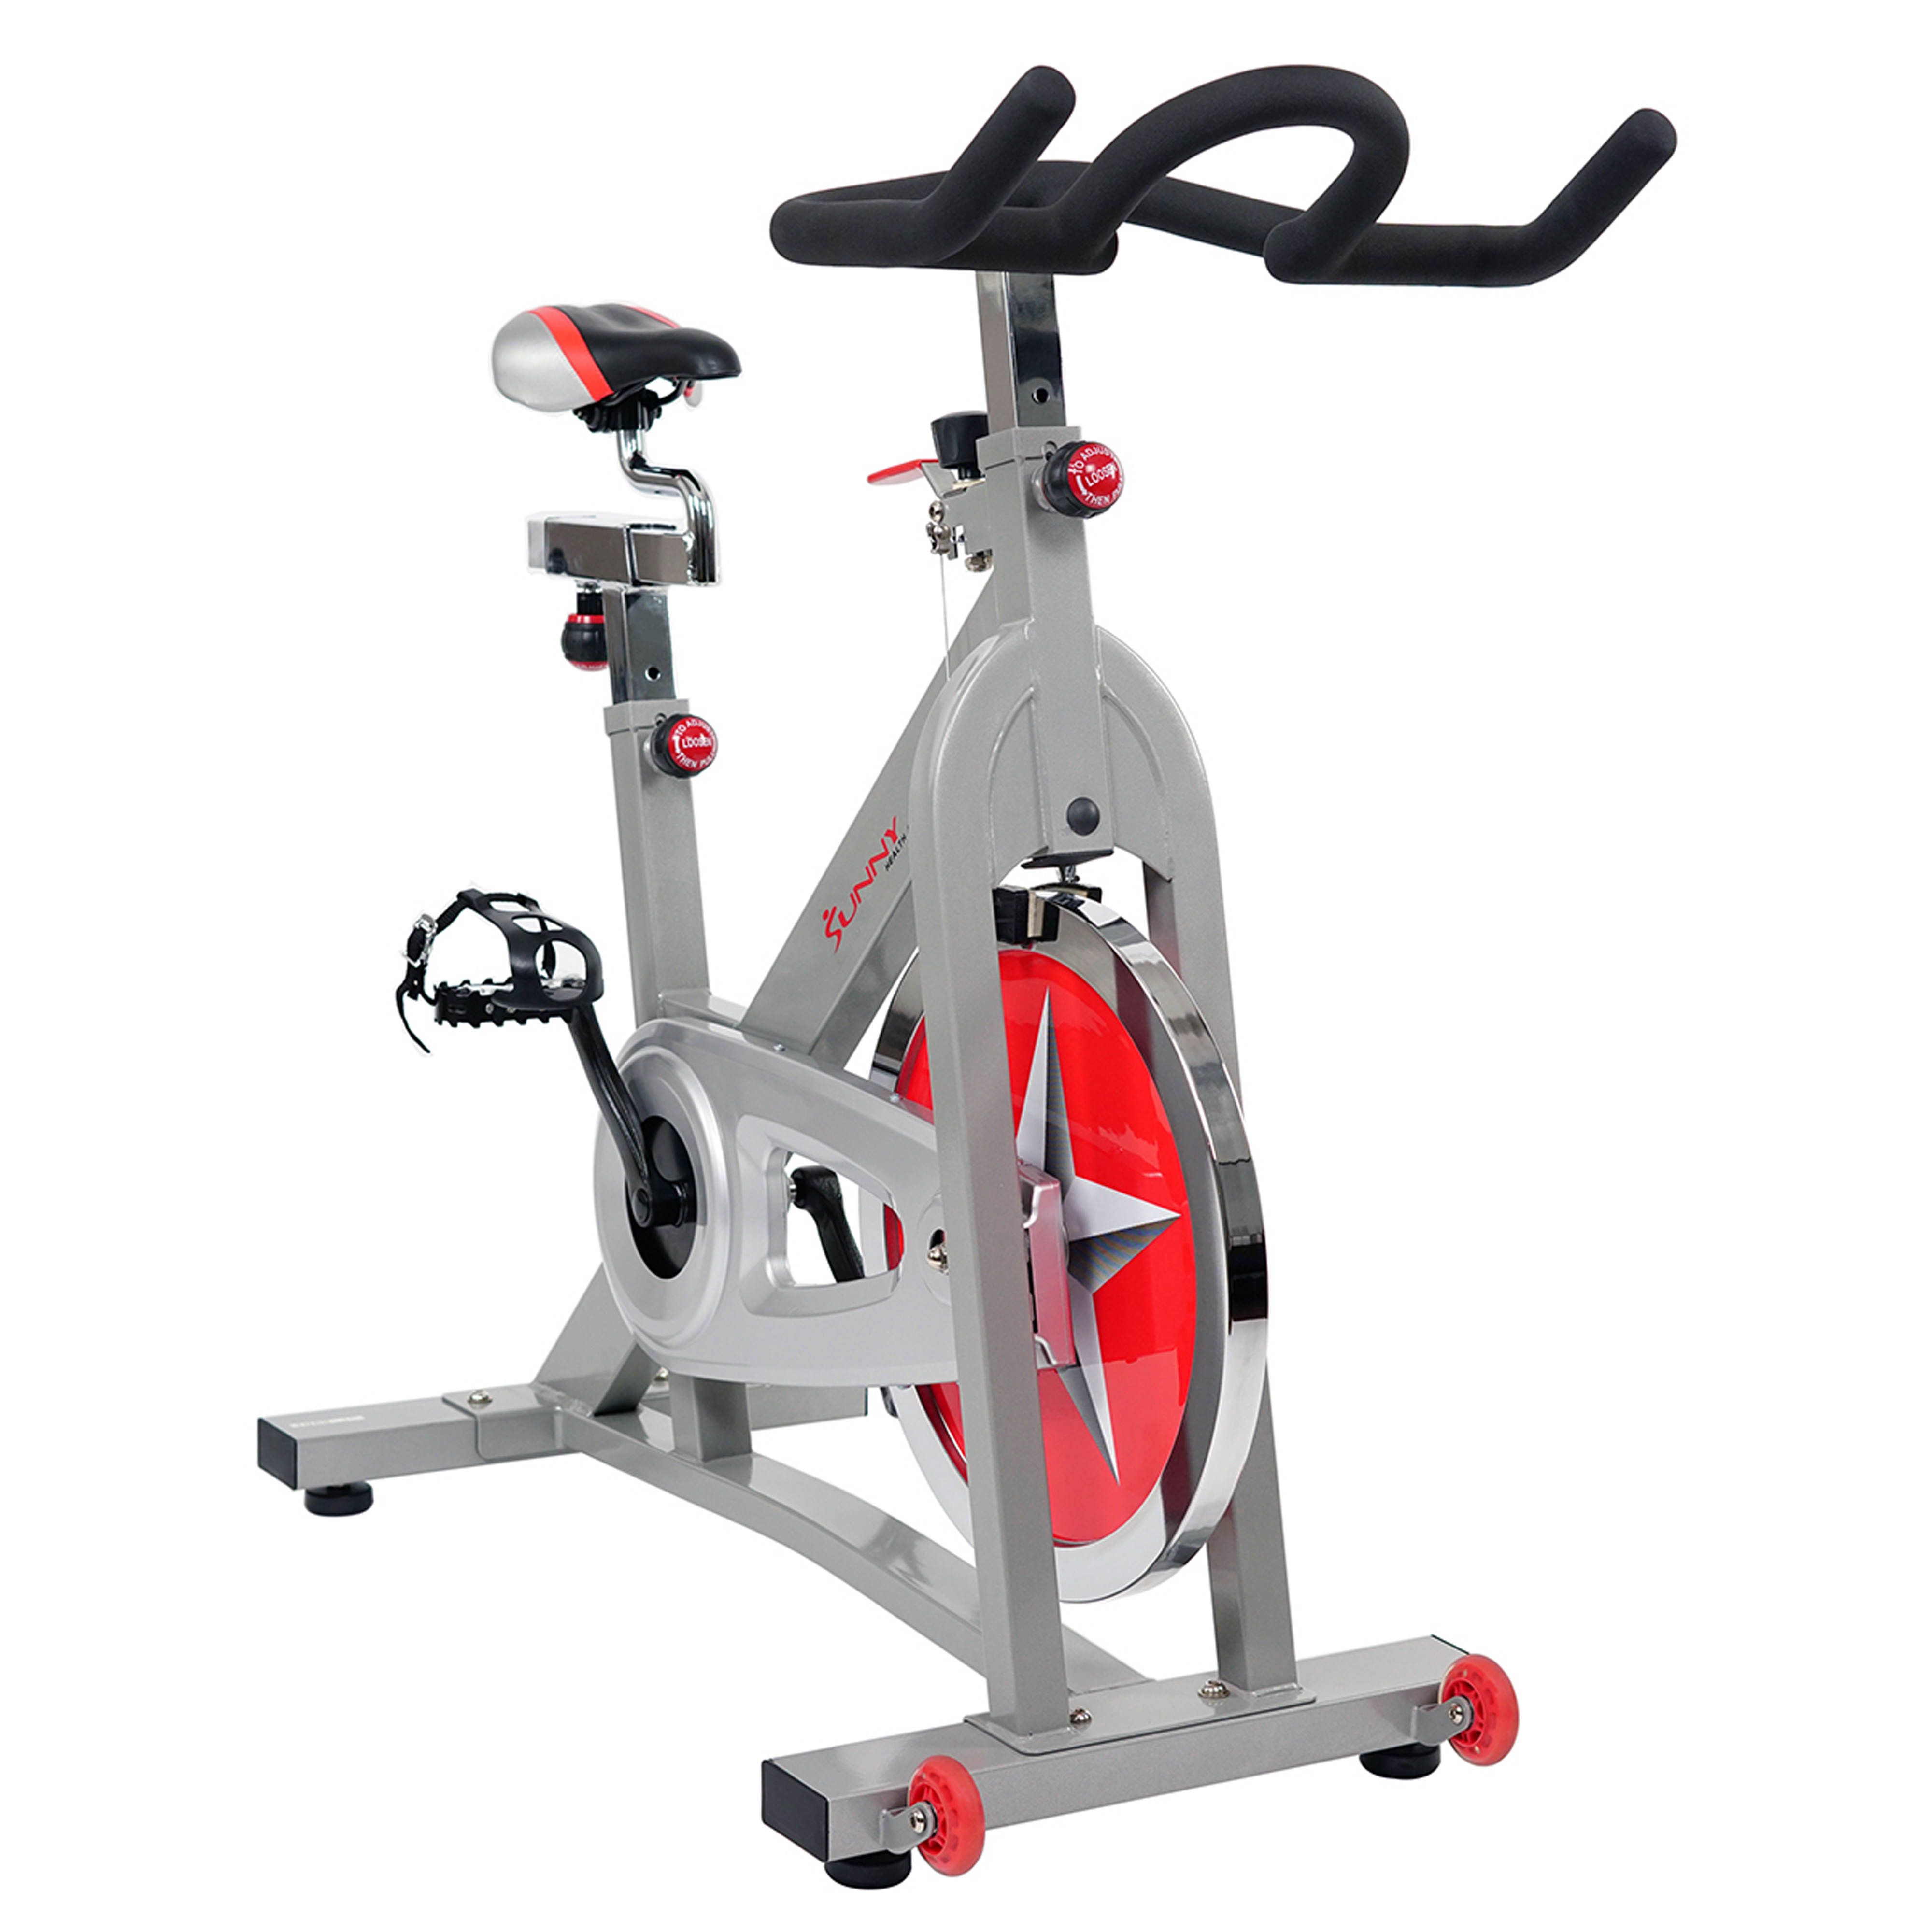 Sunny Health & Fitness Stationary Chain Drive 40 lb Flywheel Pro Indoor Cycling Exercise Bike Trainer, Workout Machine, SF-B901 - image 9 of 9